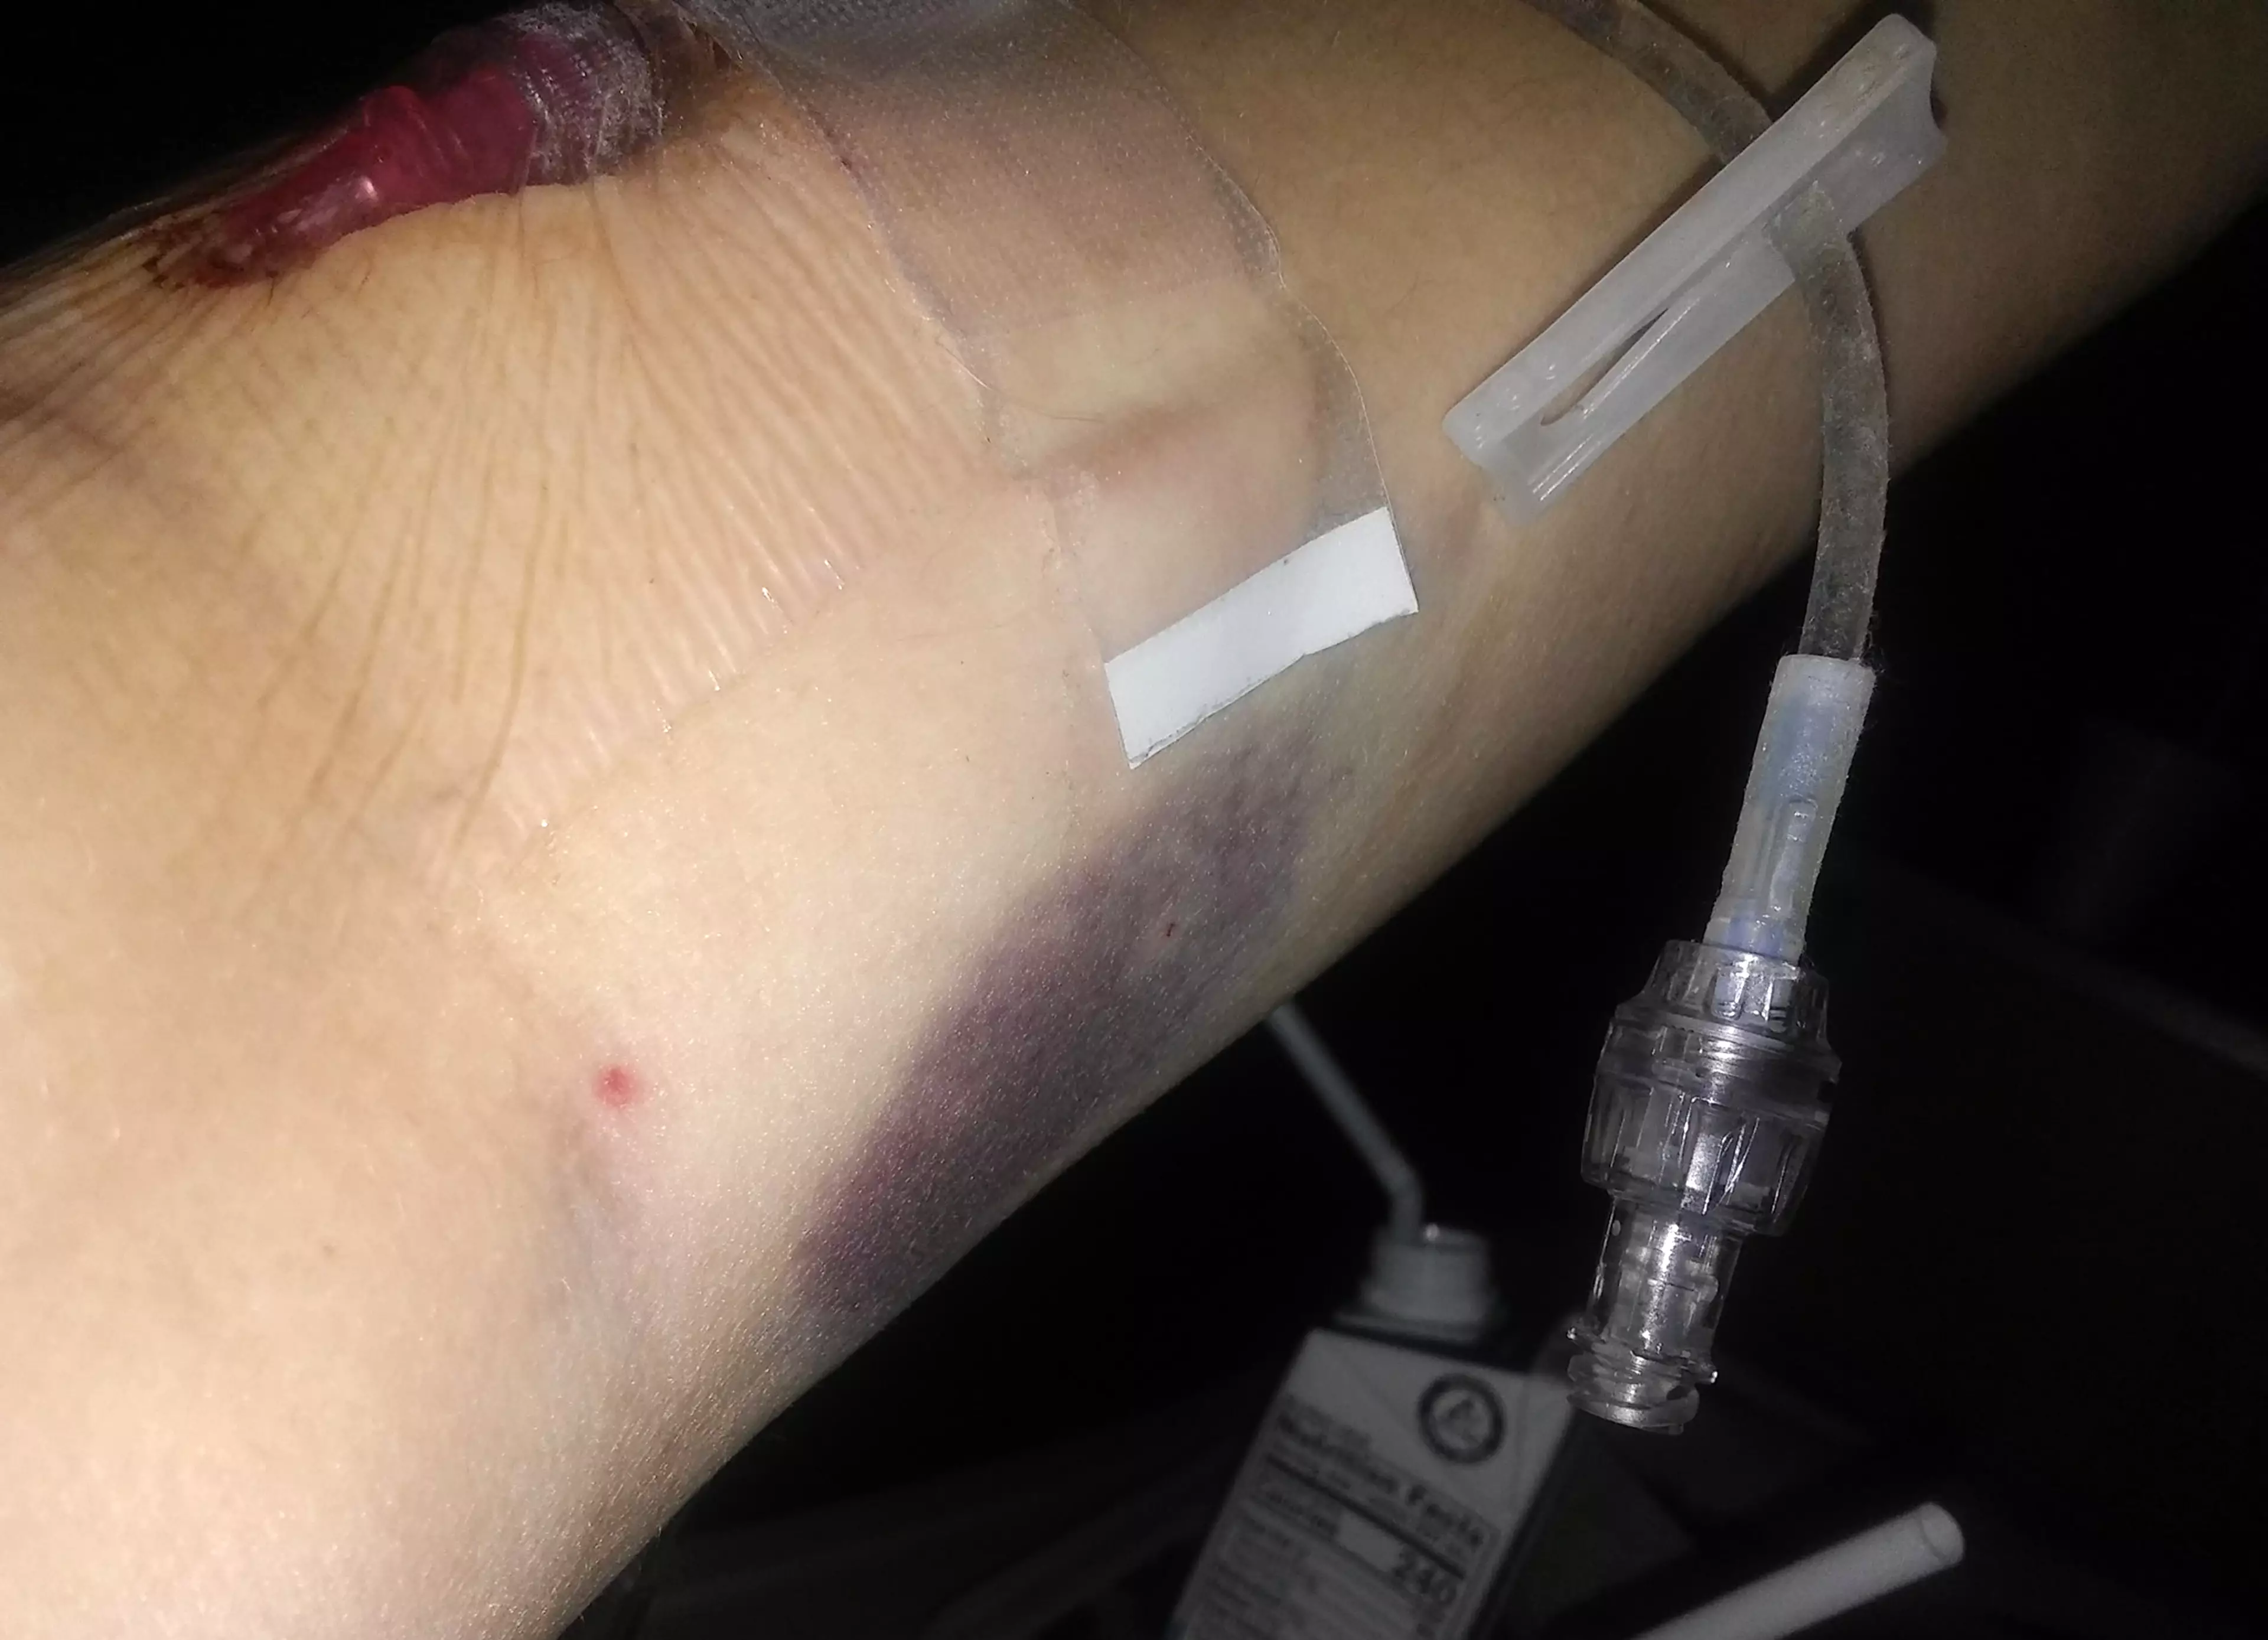 Jessica was hooked up to an IV machine for a week (